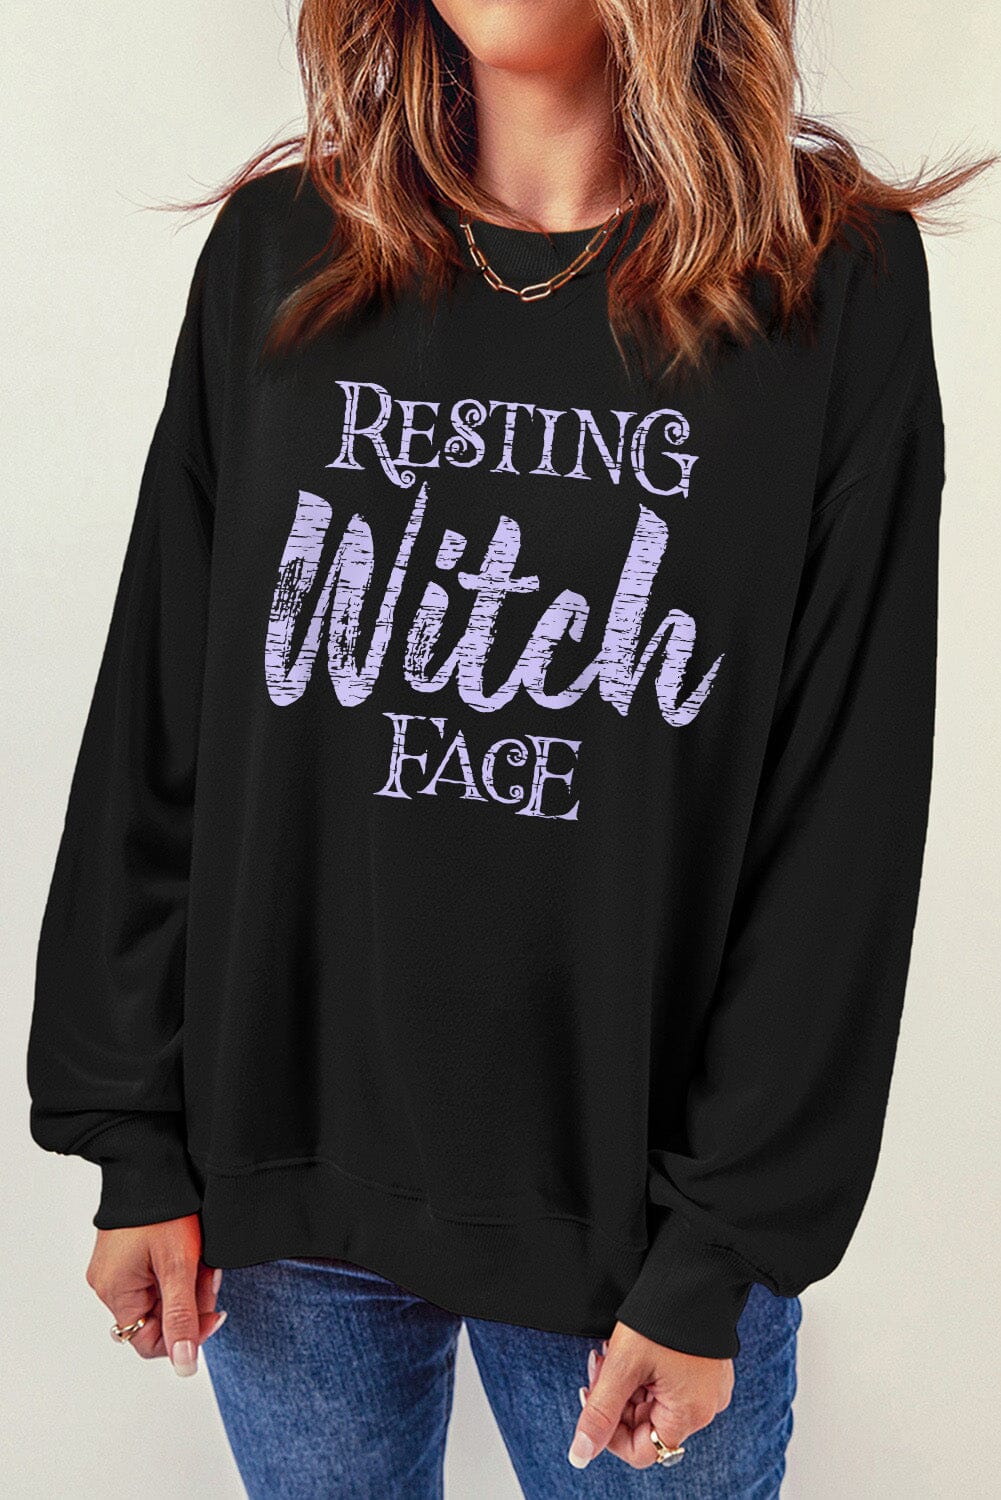 RESTING WITCH FACE Graphic Sweatshirt - Sydney So Sweet